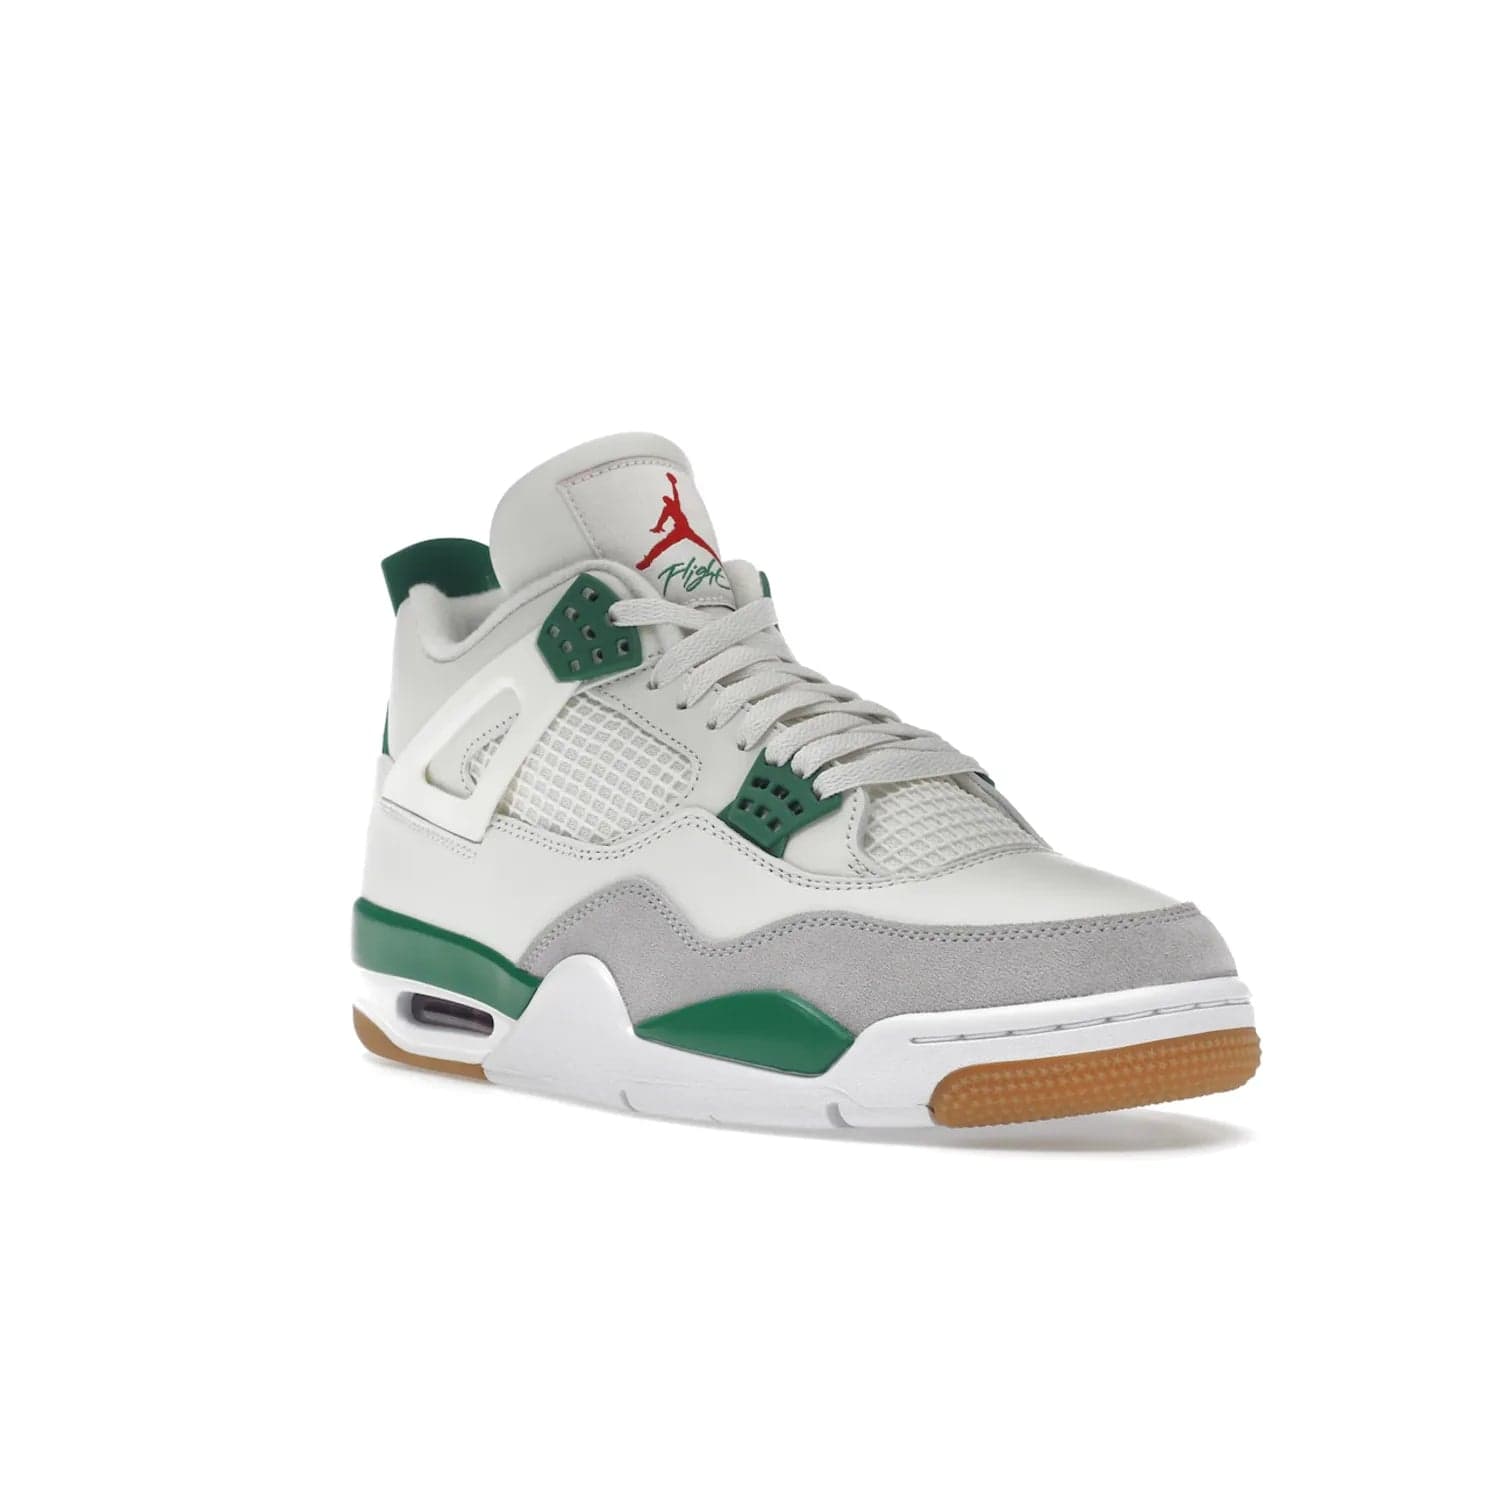 Jordan 4 Retro SB Pine Green - Image 6 - Only at www.BallersClubKickz.com - A white leather upper combined with a Neutral Grey suede mudguard gives this limited Air Jordan 4 Retro SB Pine Green sneaker its unmistakable style. Released March 20, 2023, the Jordan 4 Retro SB features a white and Pine Green midsole plus a red air unit with a gum outsole for grip. The perfect blend of Nike SB skateboarding and Jordan 4 classic design.